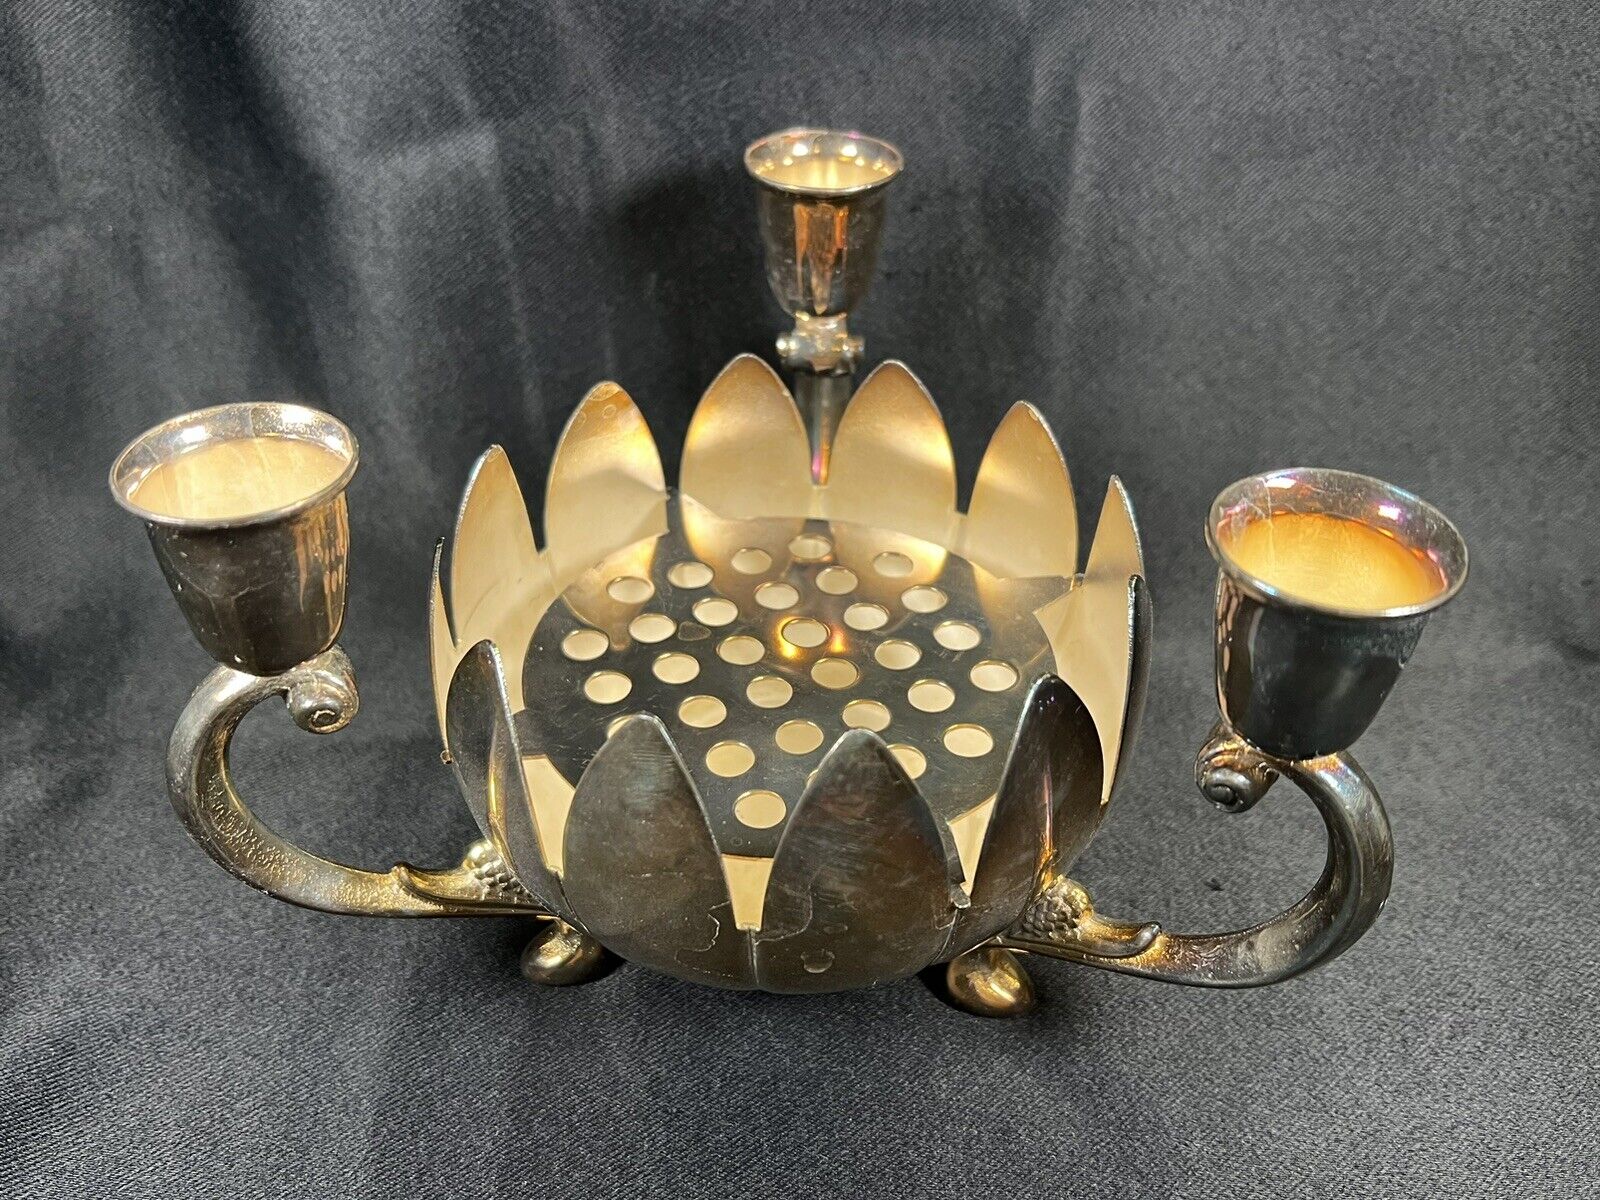 VTG Silver Plated Lotus Flower Candle Holder with Flower Frog Center Made Italy